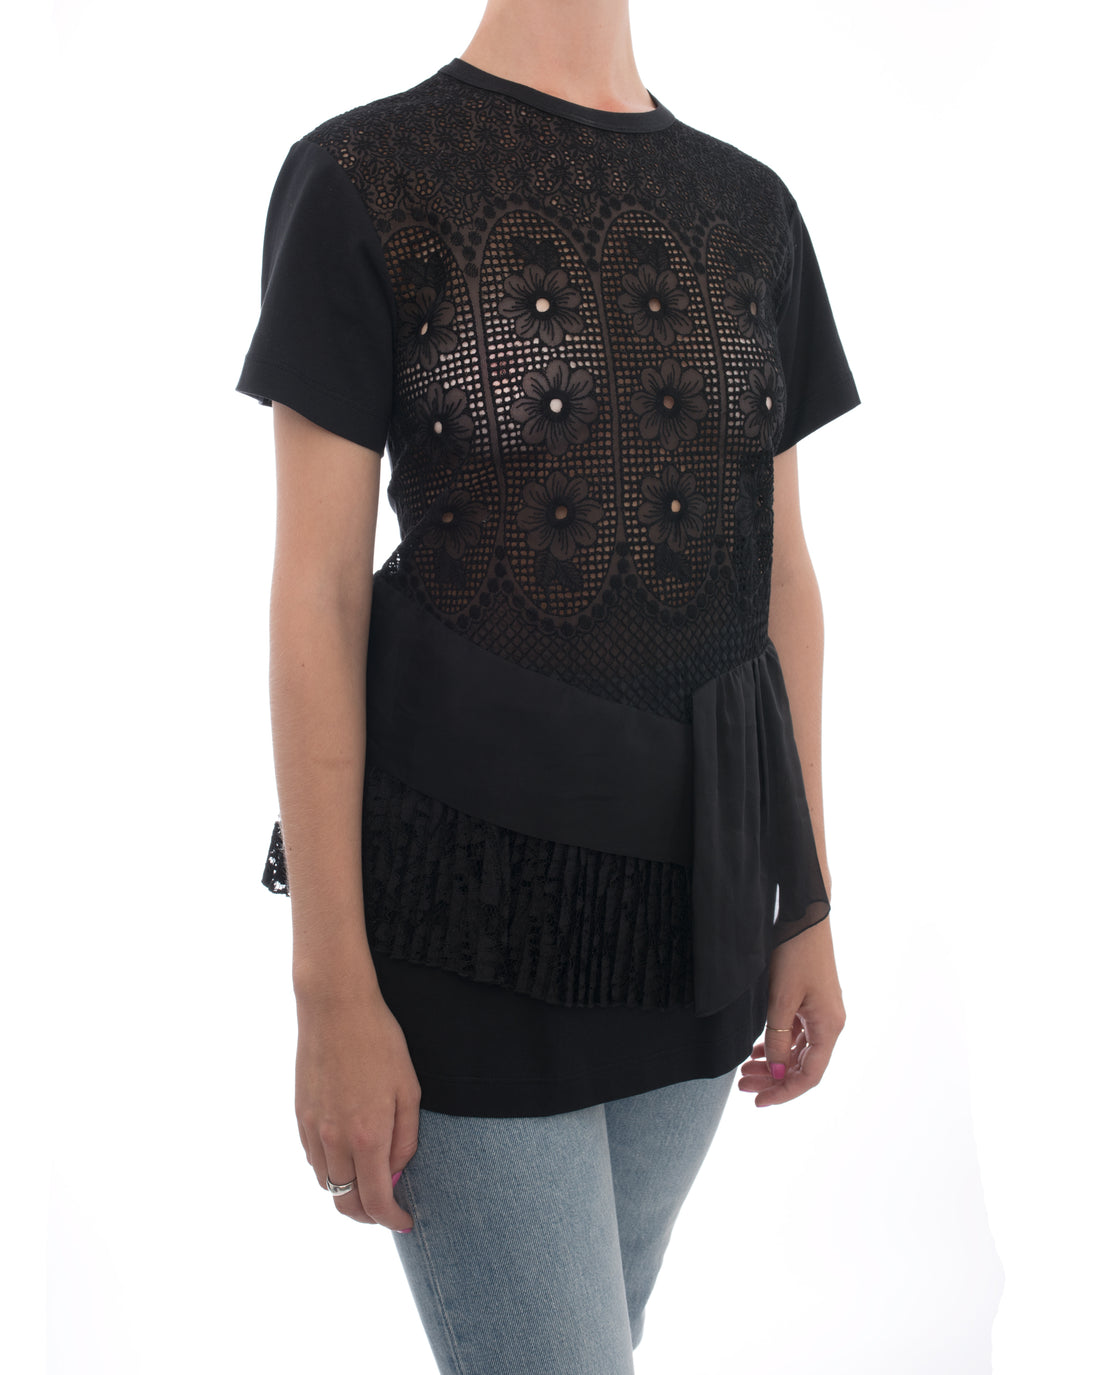 No. 21 Black T-Shirt with Broderie Anglaise Inset - 6